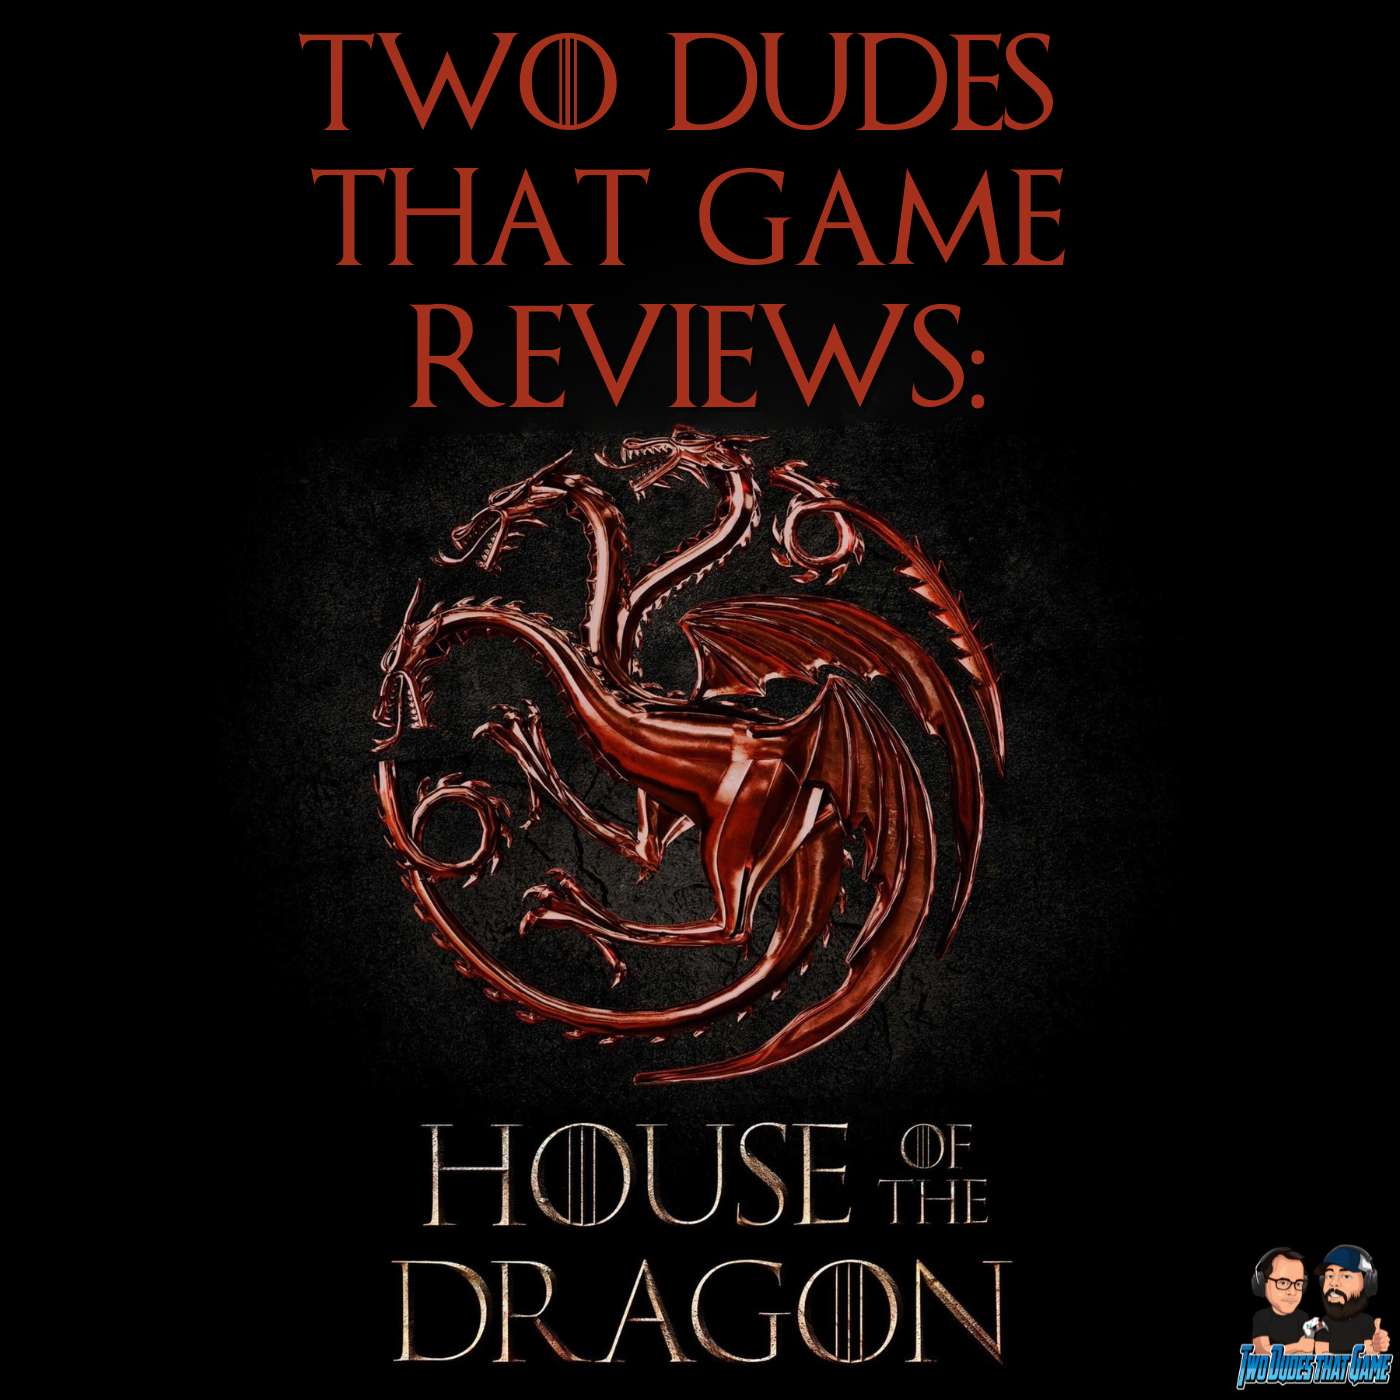 Artwork for Two Dudes That Game Reviews: House of the Dragon